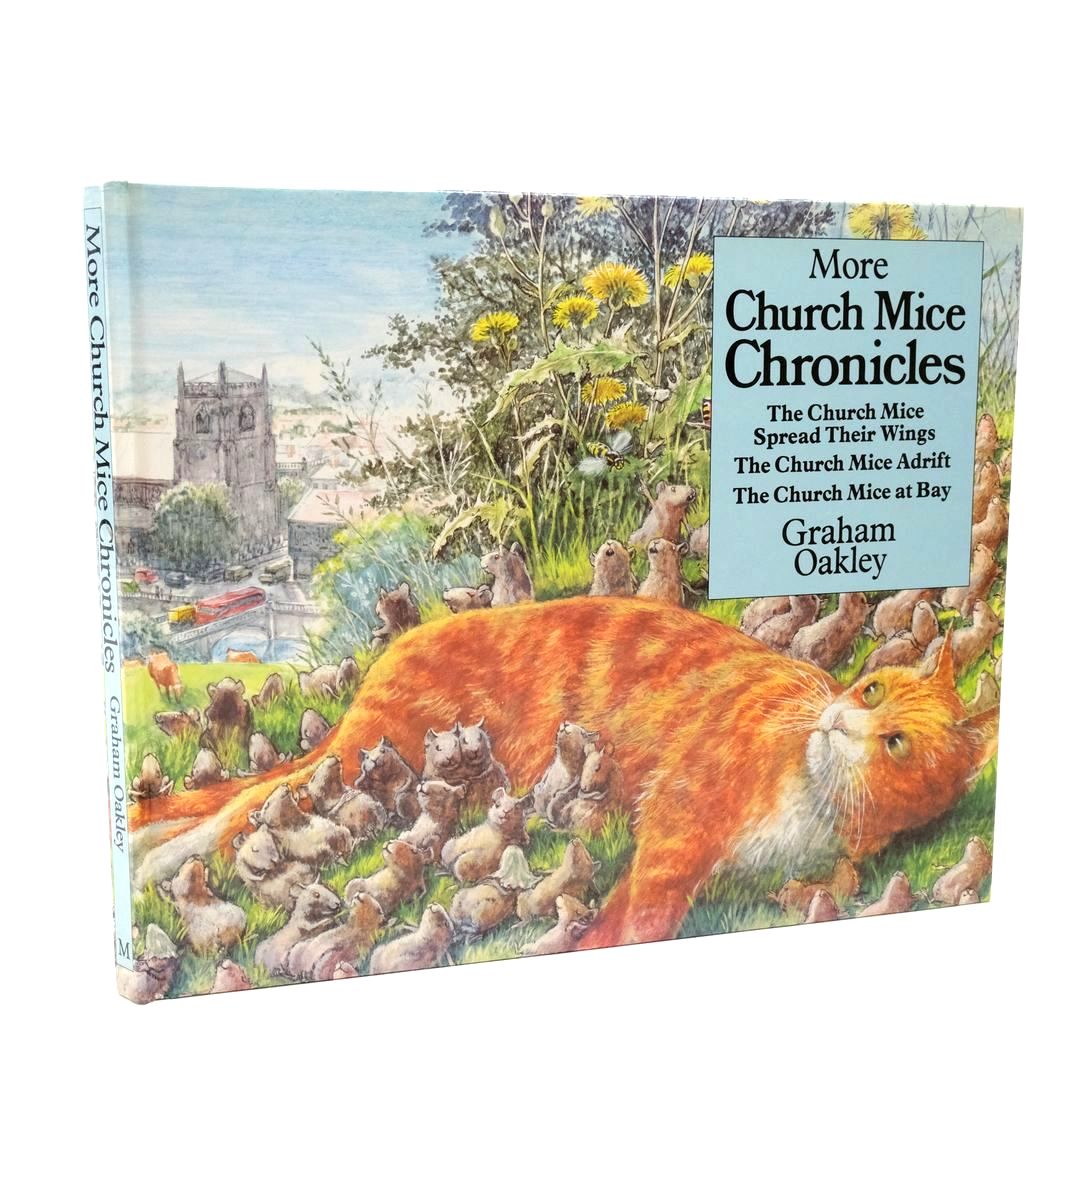 Photo of MORE CHURCH MICE CHRONICLES written by Oakley, Graham illustrated by Oakley, Graham published by Macmillan Children's Books (STOCK CODE: 1322729)  for sale by Stella & Rose's Books